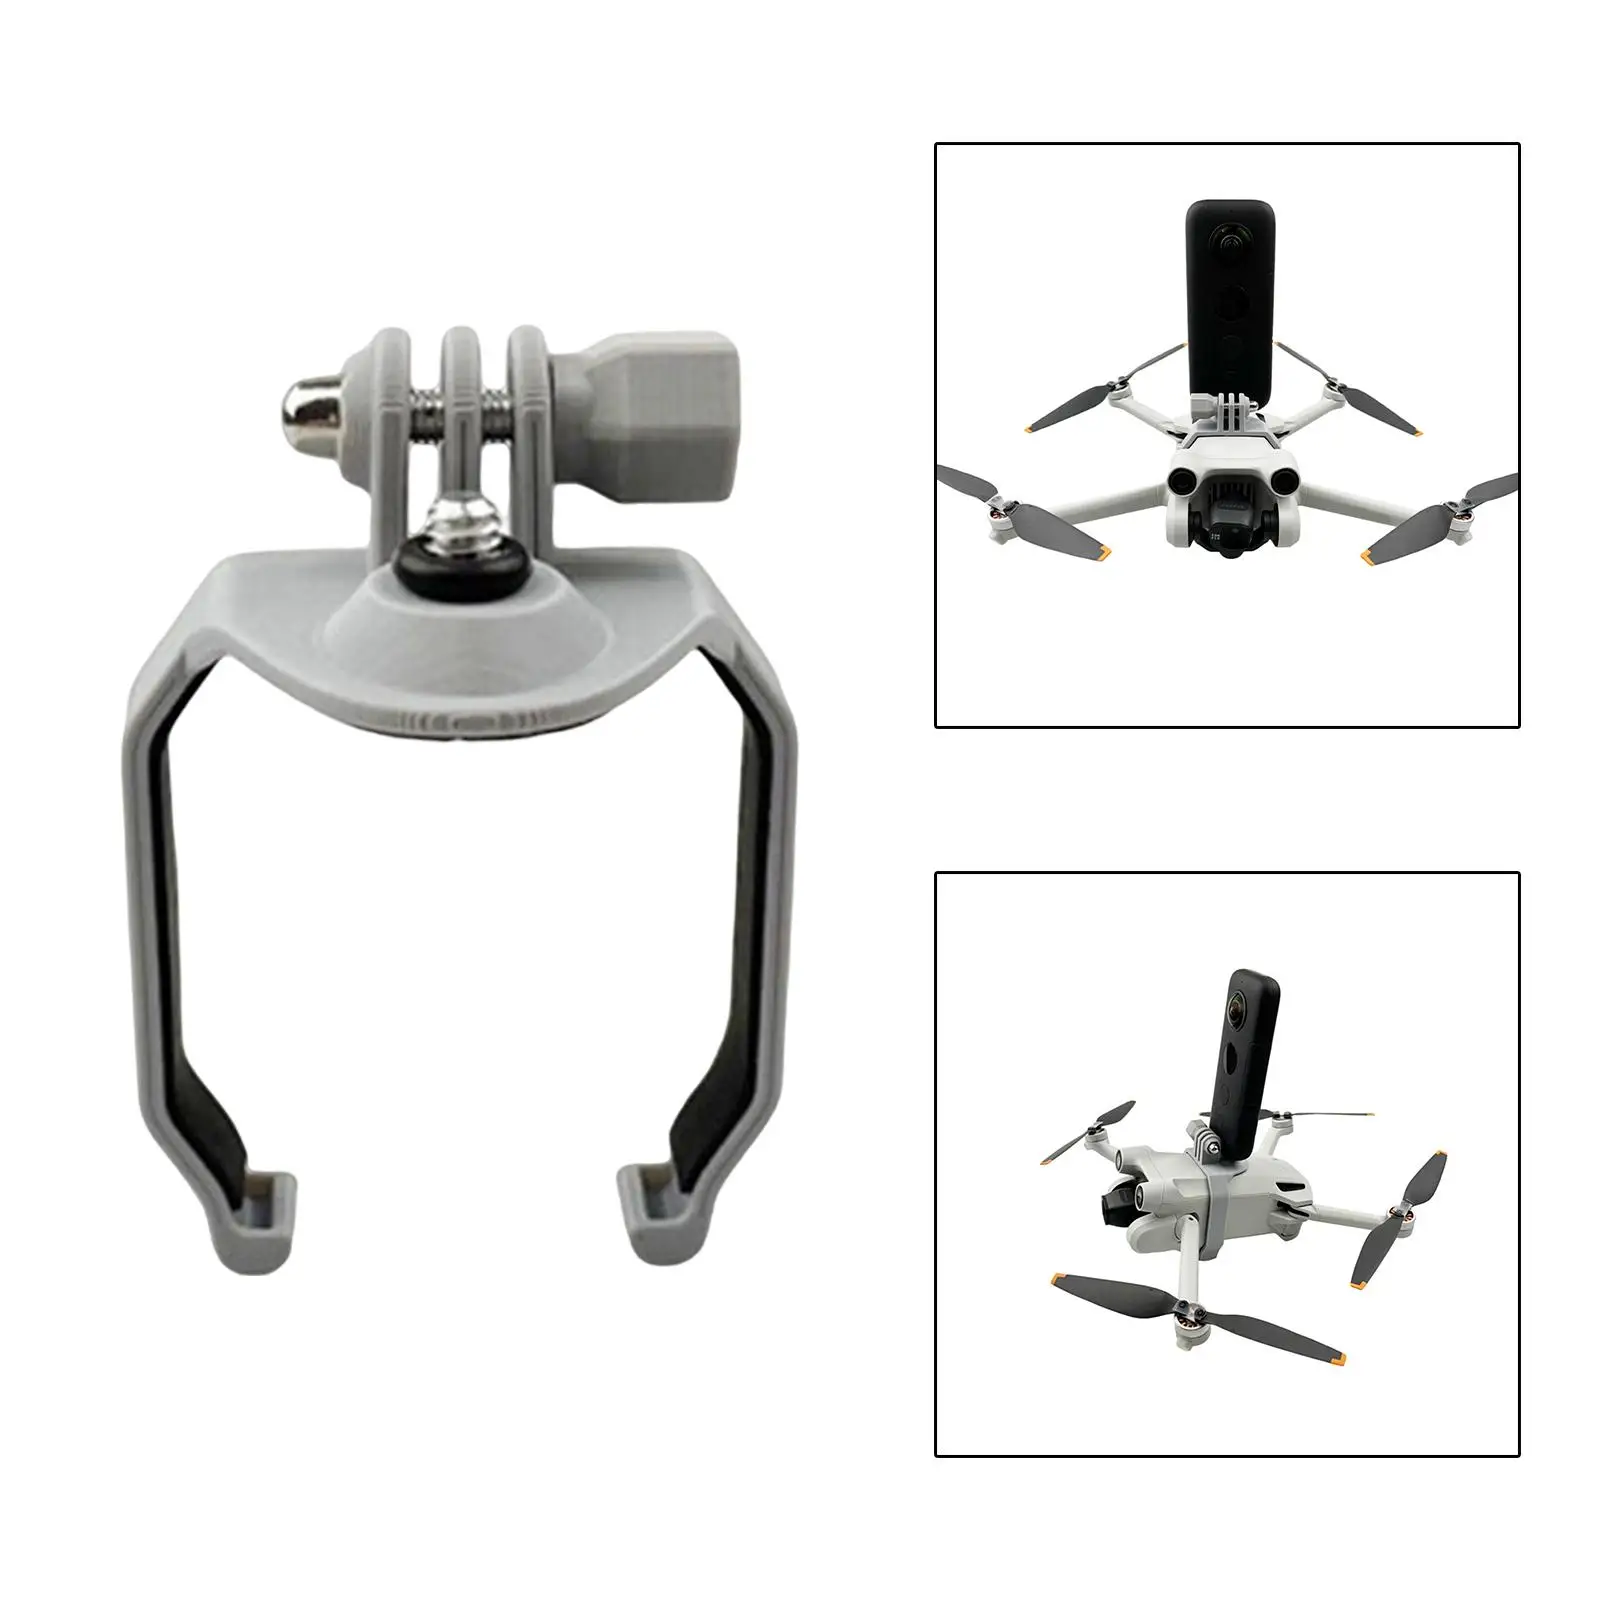 1Pcs Adapter Bracket Bracket Mount Drone Extended Adapter Mount for Panorama Camera Parts